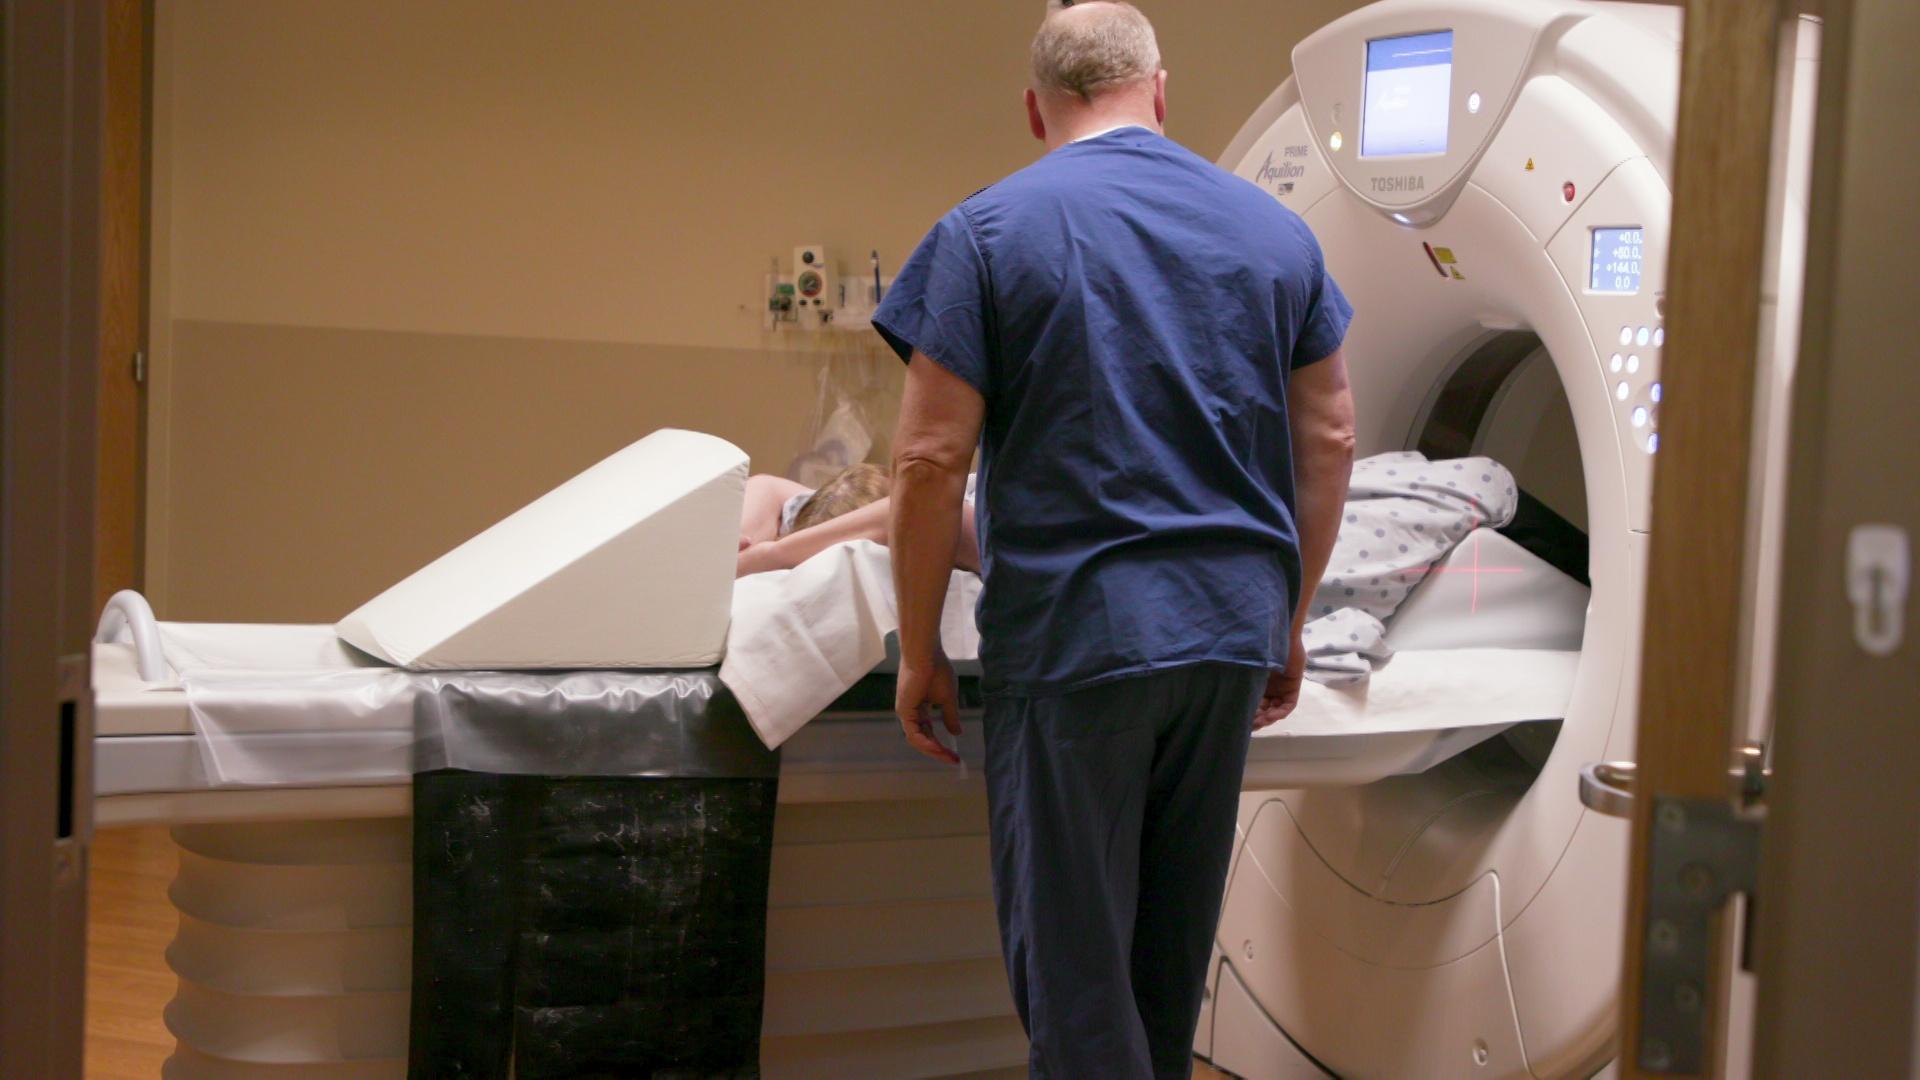 A still image shows a worker in blue scrubs standing over a patient lying down in an MRI machine.